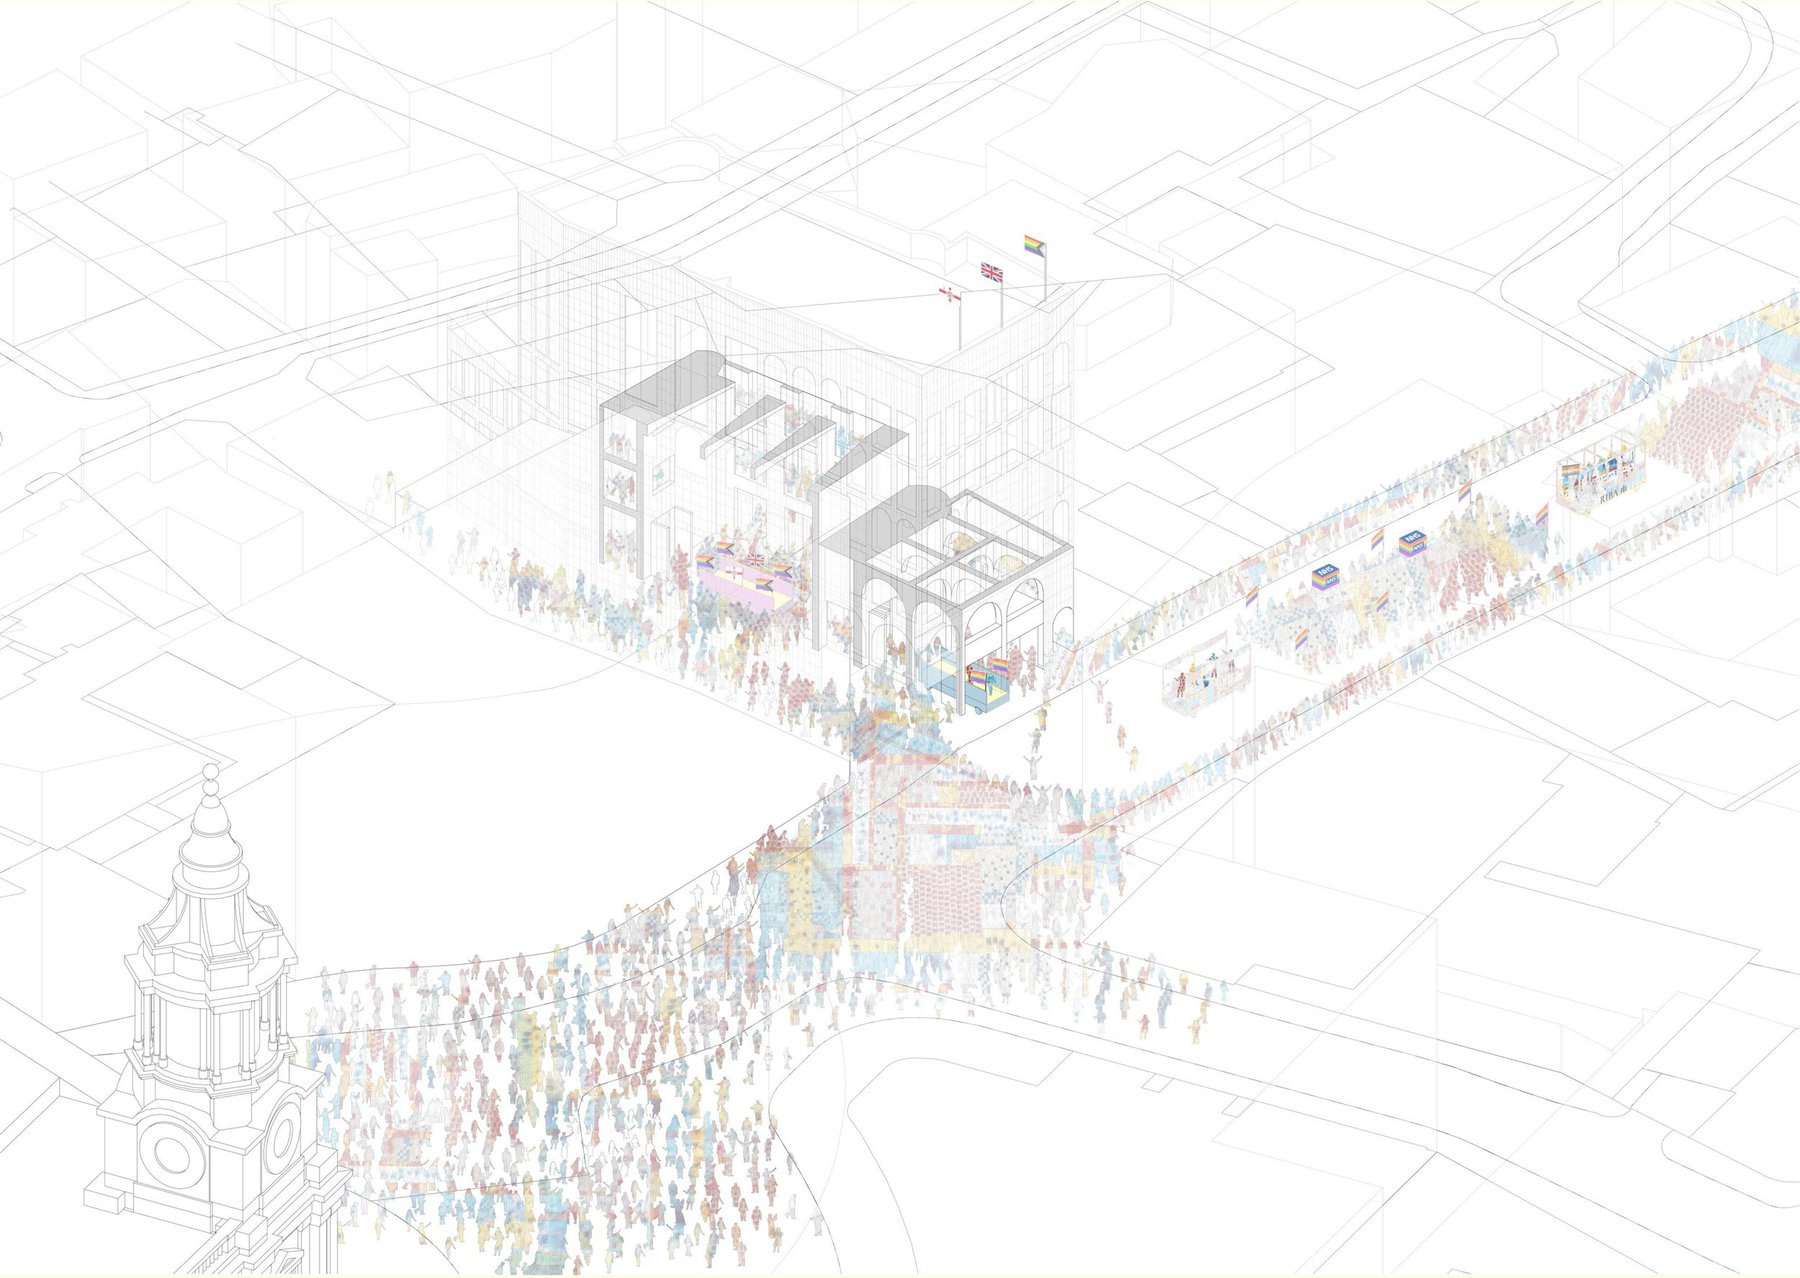 sketch of Cultural Centre at London Pride, start of a new route with lots of people at a different view